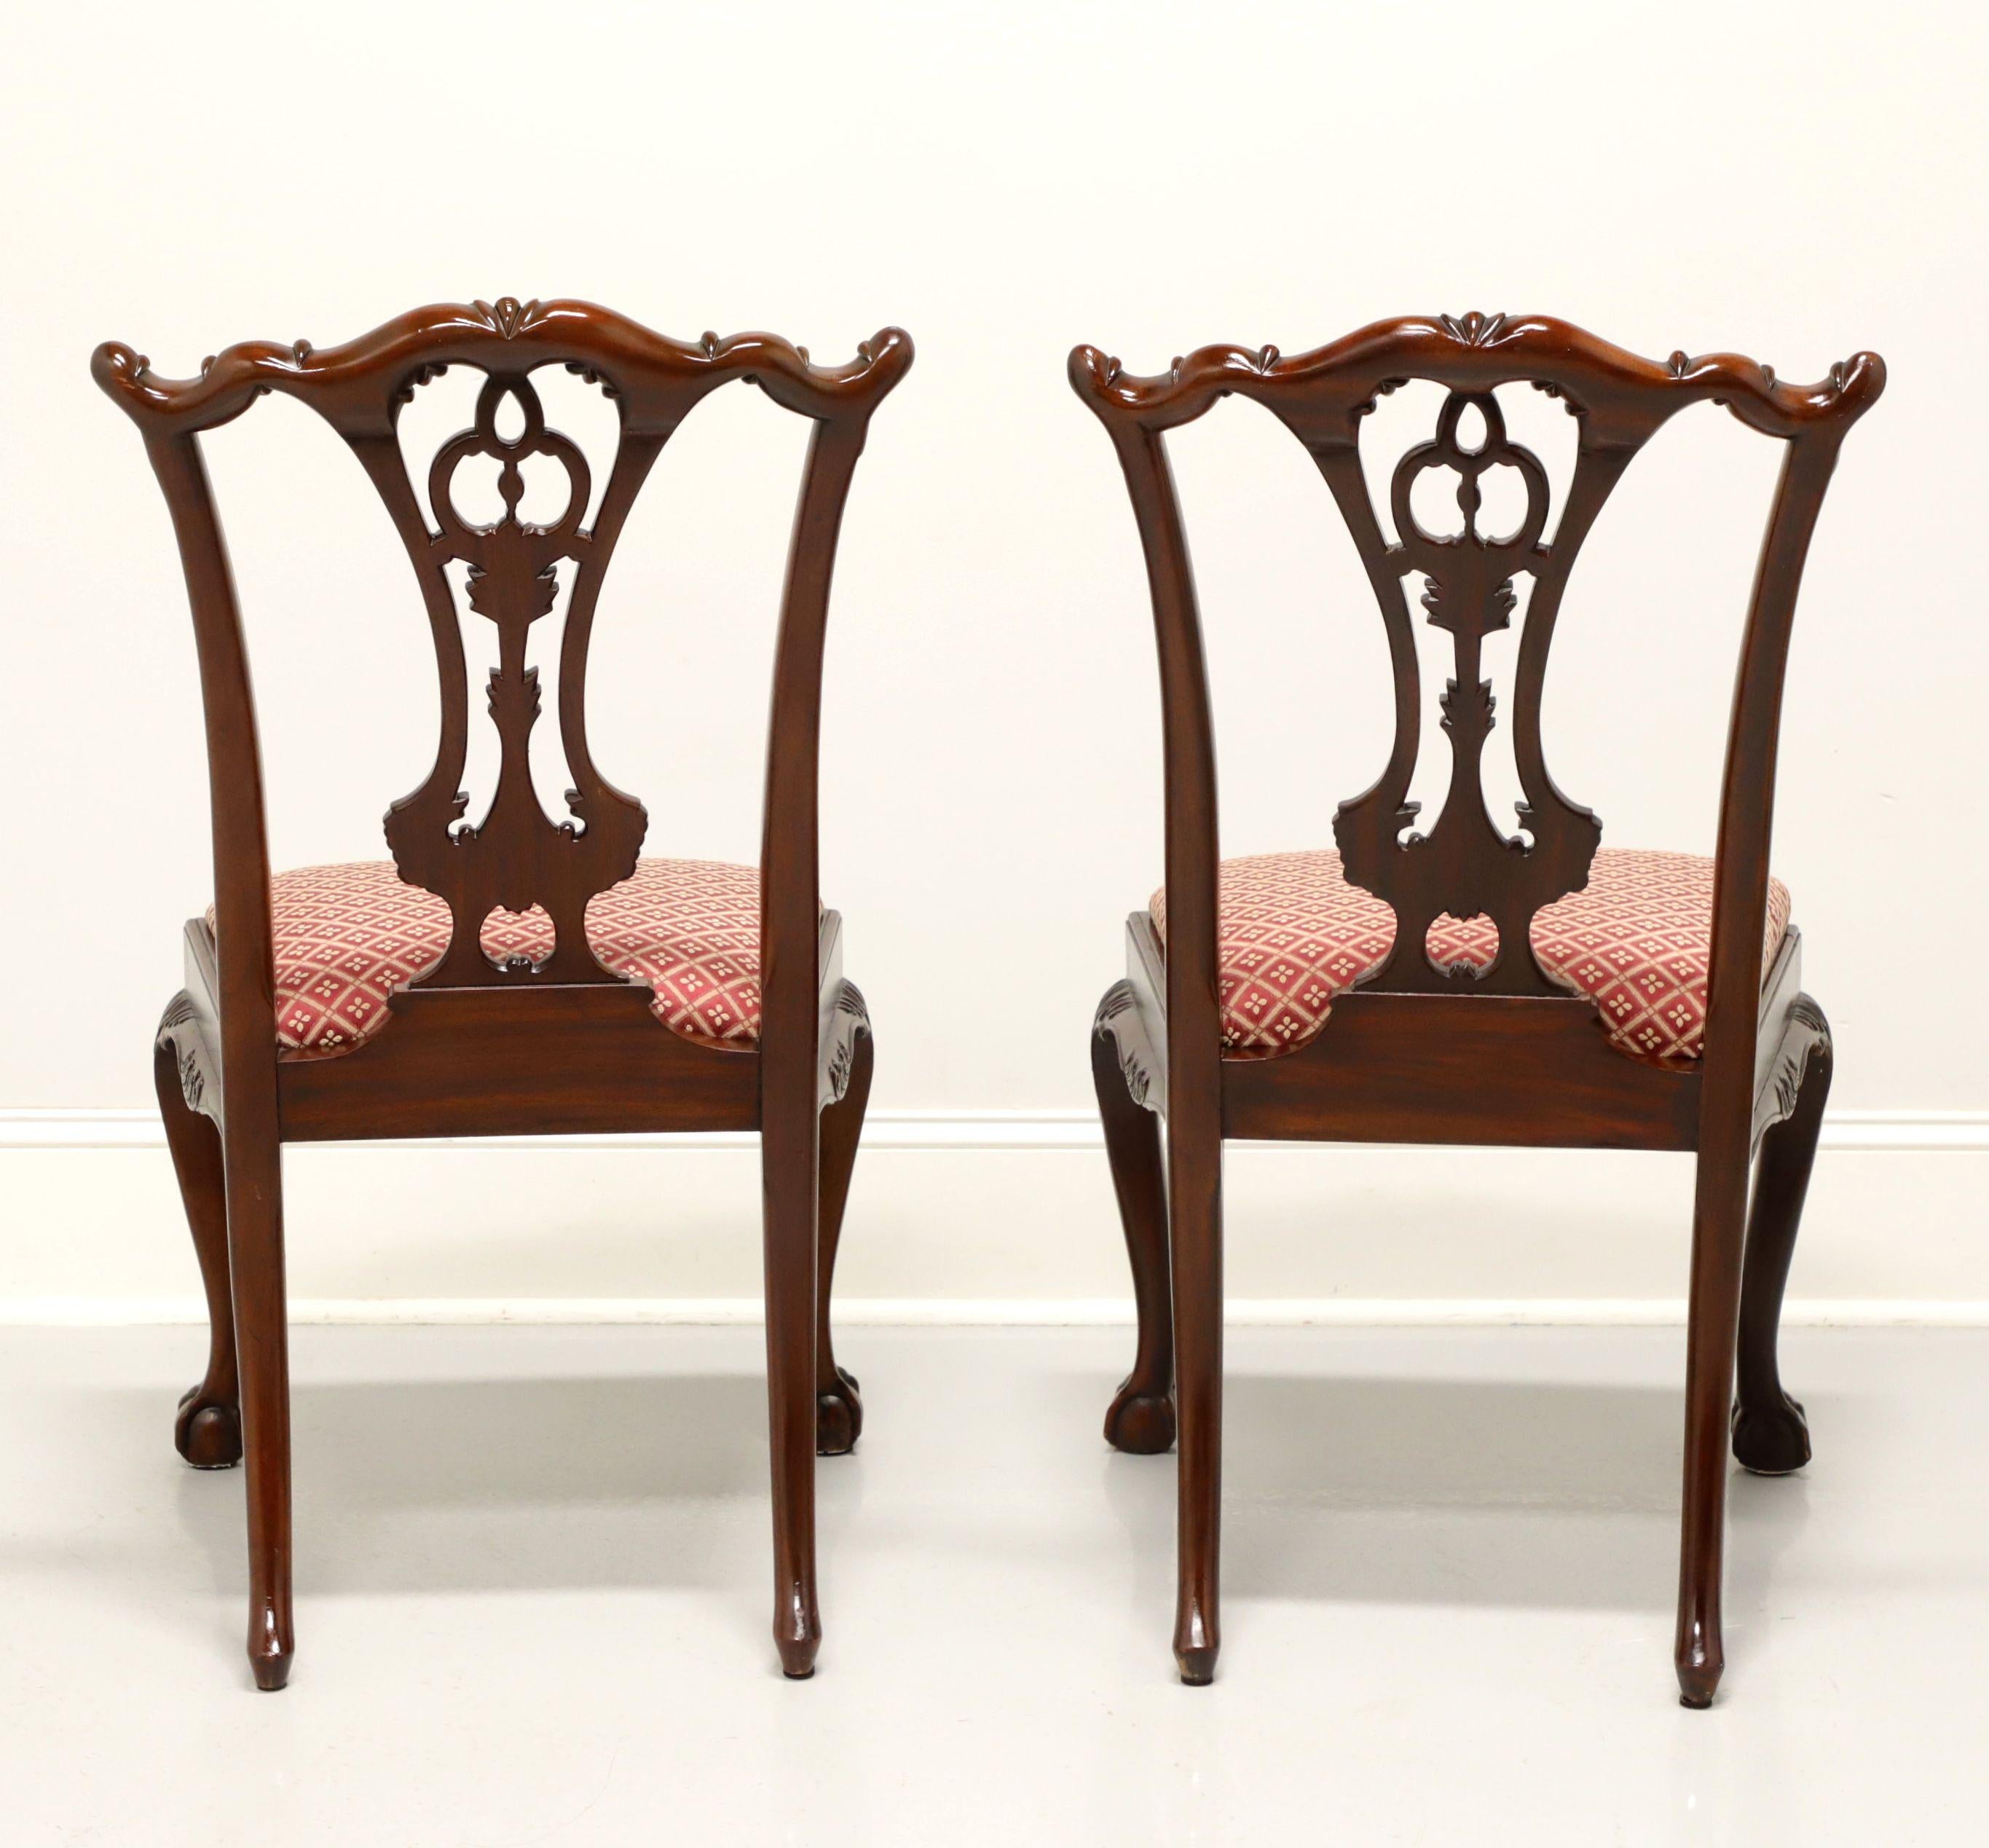 MAITLAND SMITH Mahogany Chippendale Ball in Claw Dining Side Chairs - Pair  In Good Condition For Sale In Charlotte, NC